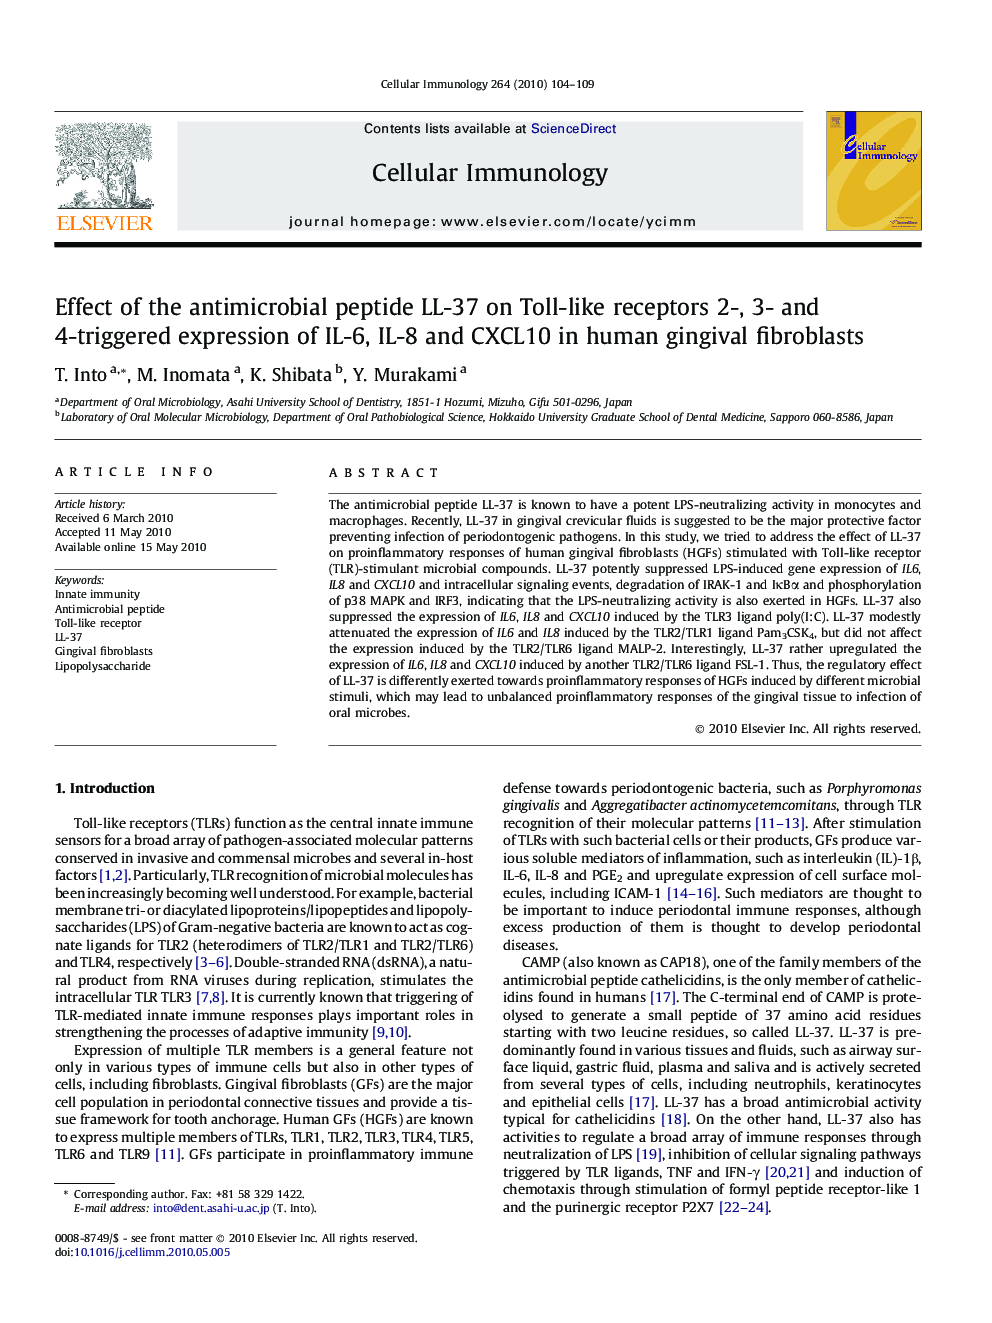 Effect of the antimicrobial peptide LL-37 on Toll-like receptors 2-, 3- and 4-triggered expression of IL-6, IL-8 and CXCL10 in human gingival fibroblasts